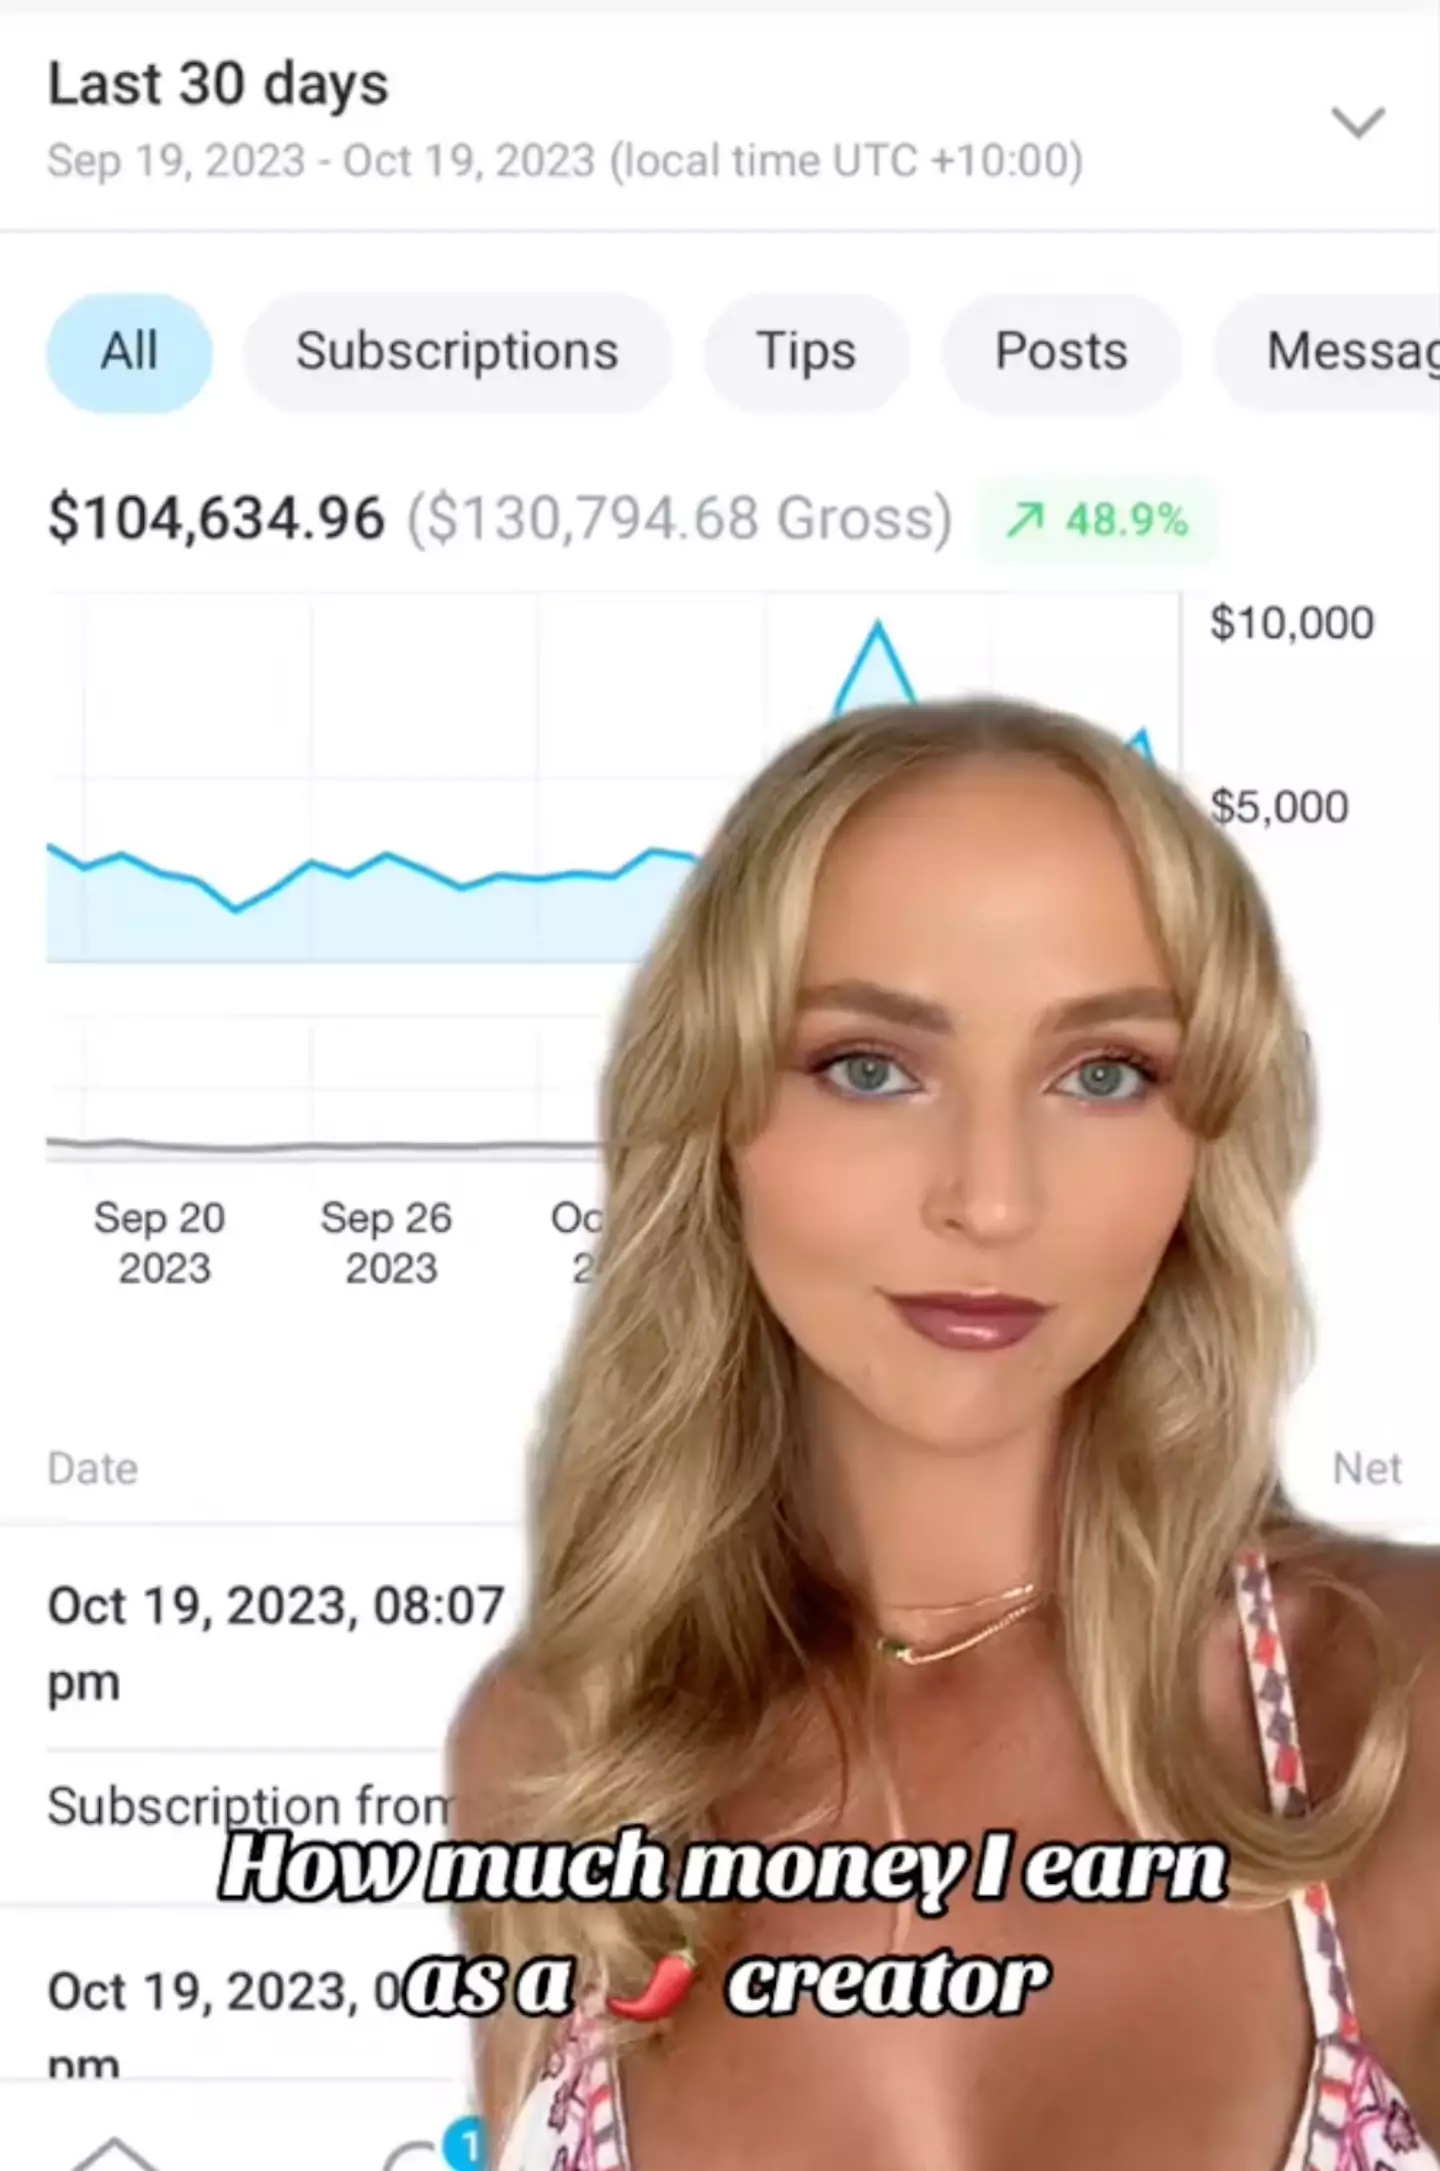 Annie posted the video to prove her earnings.